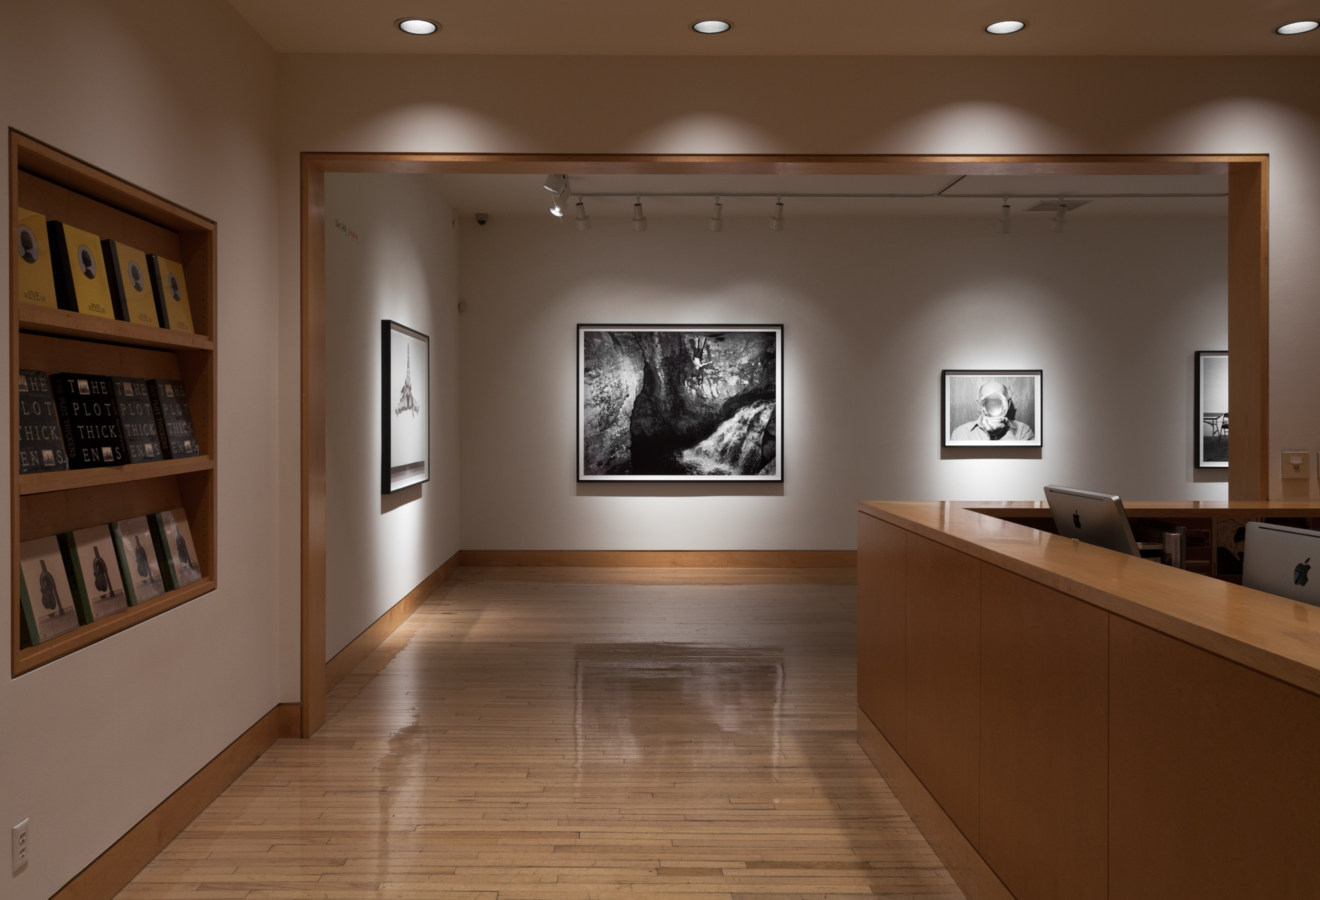 Color image of gallery entryway leading to exhibition of framed black and white photographs